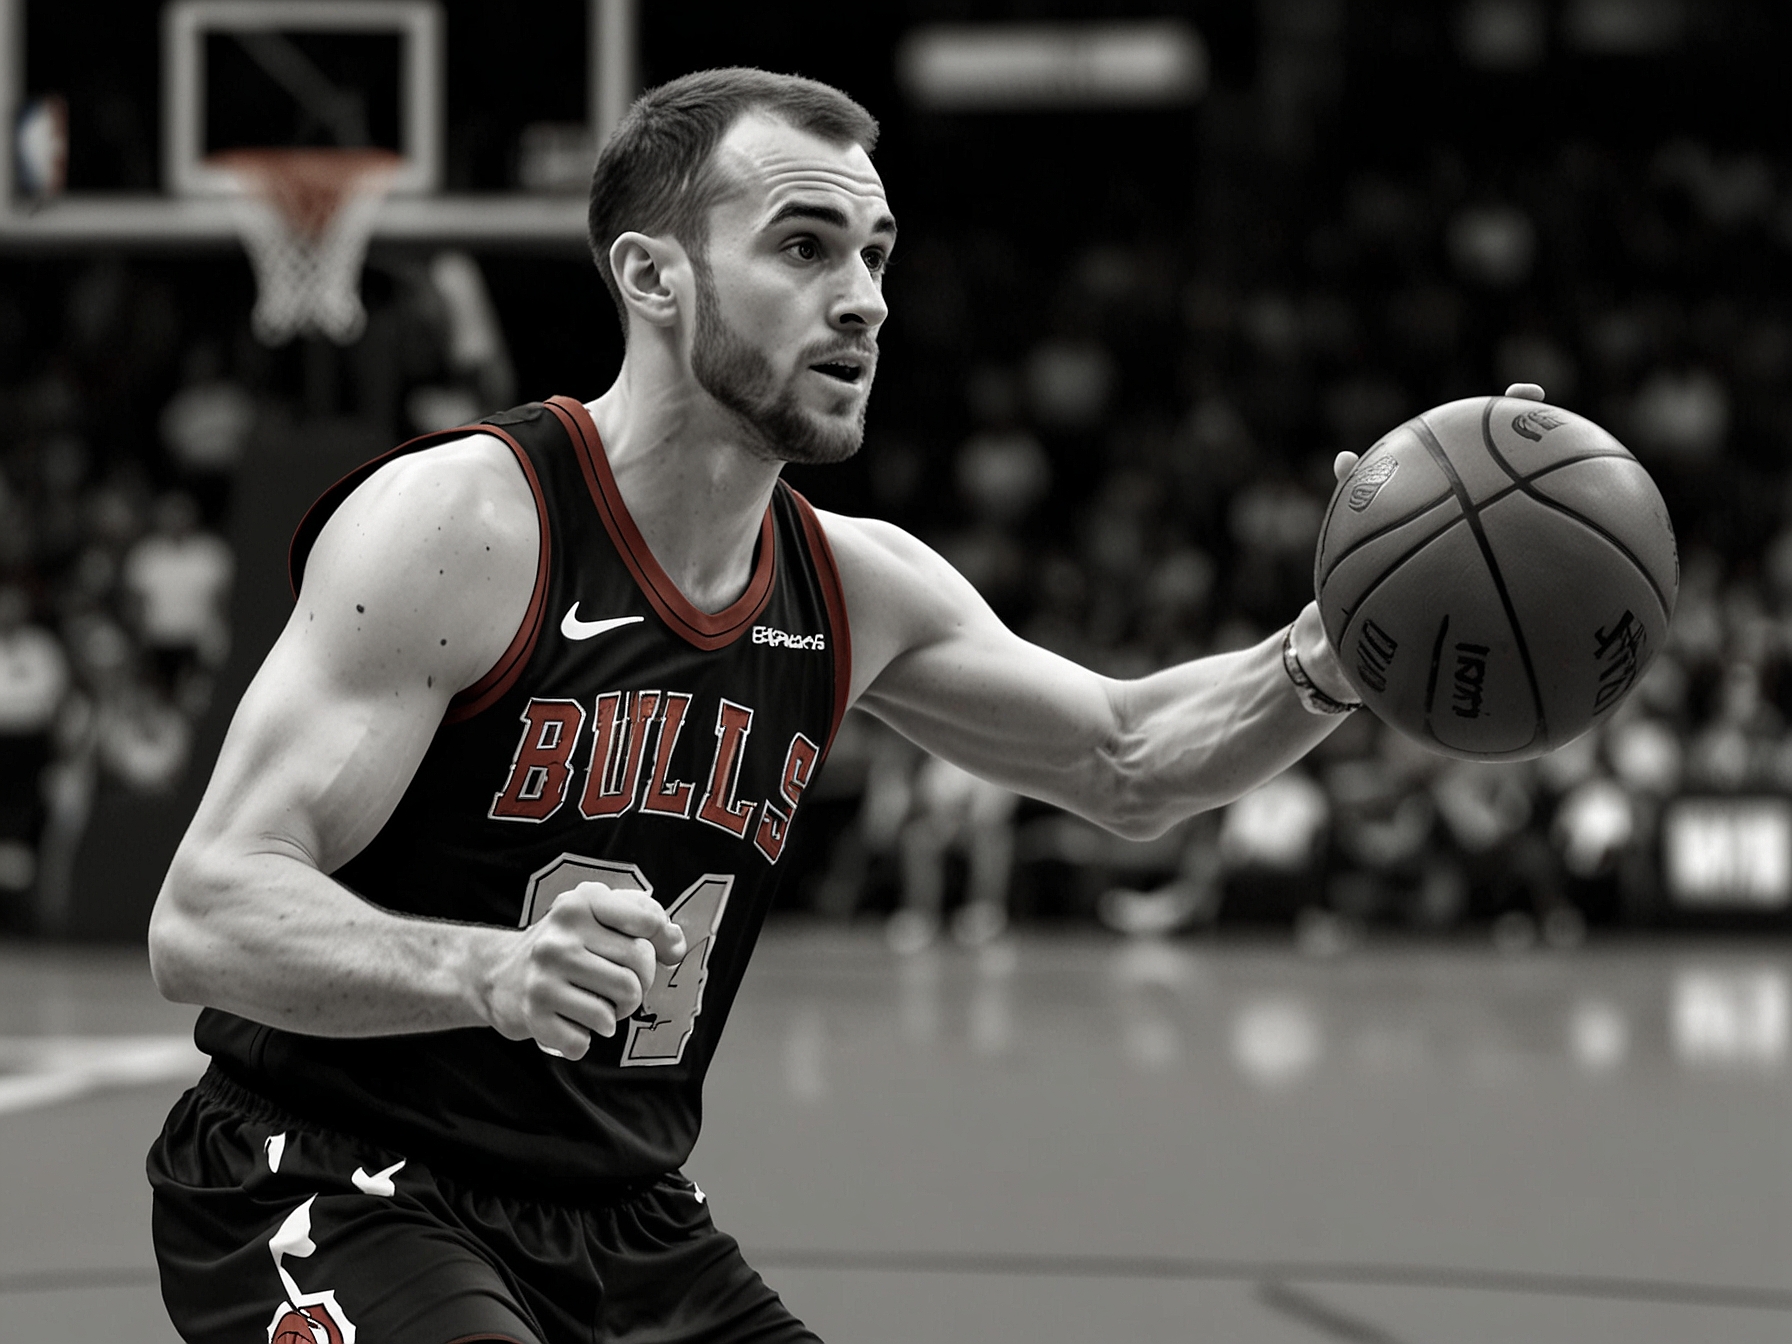 Alex Caruso in his Chicago Bulls uniform, executing a defensive move, symbolizes his defensive prowess and the tenacity he brings to the OKC Thunder's lineup.